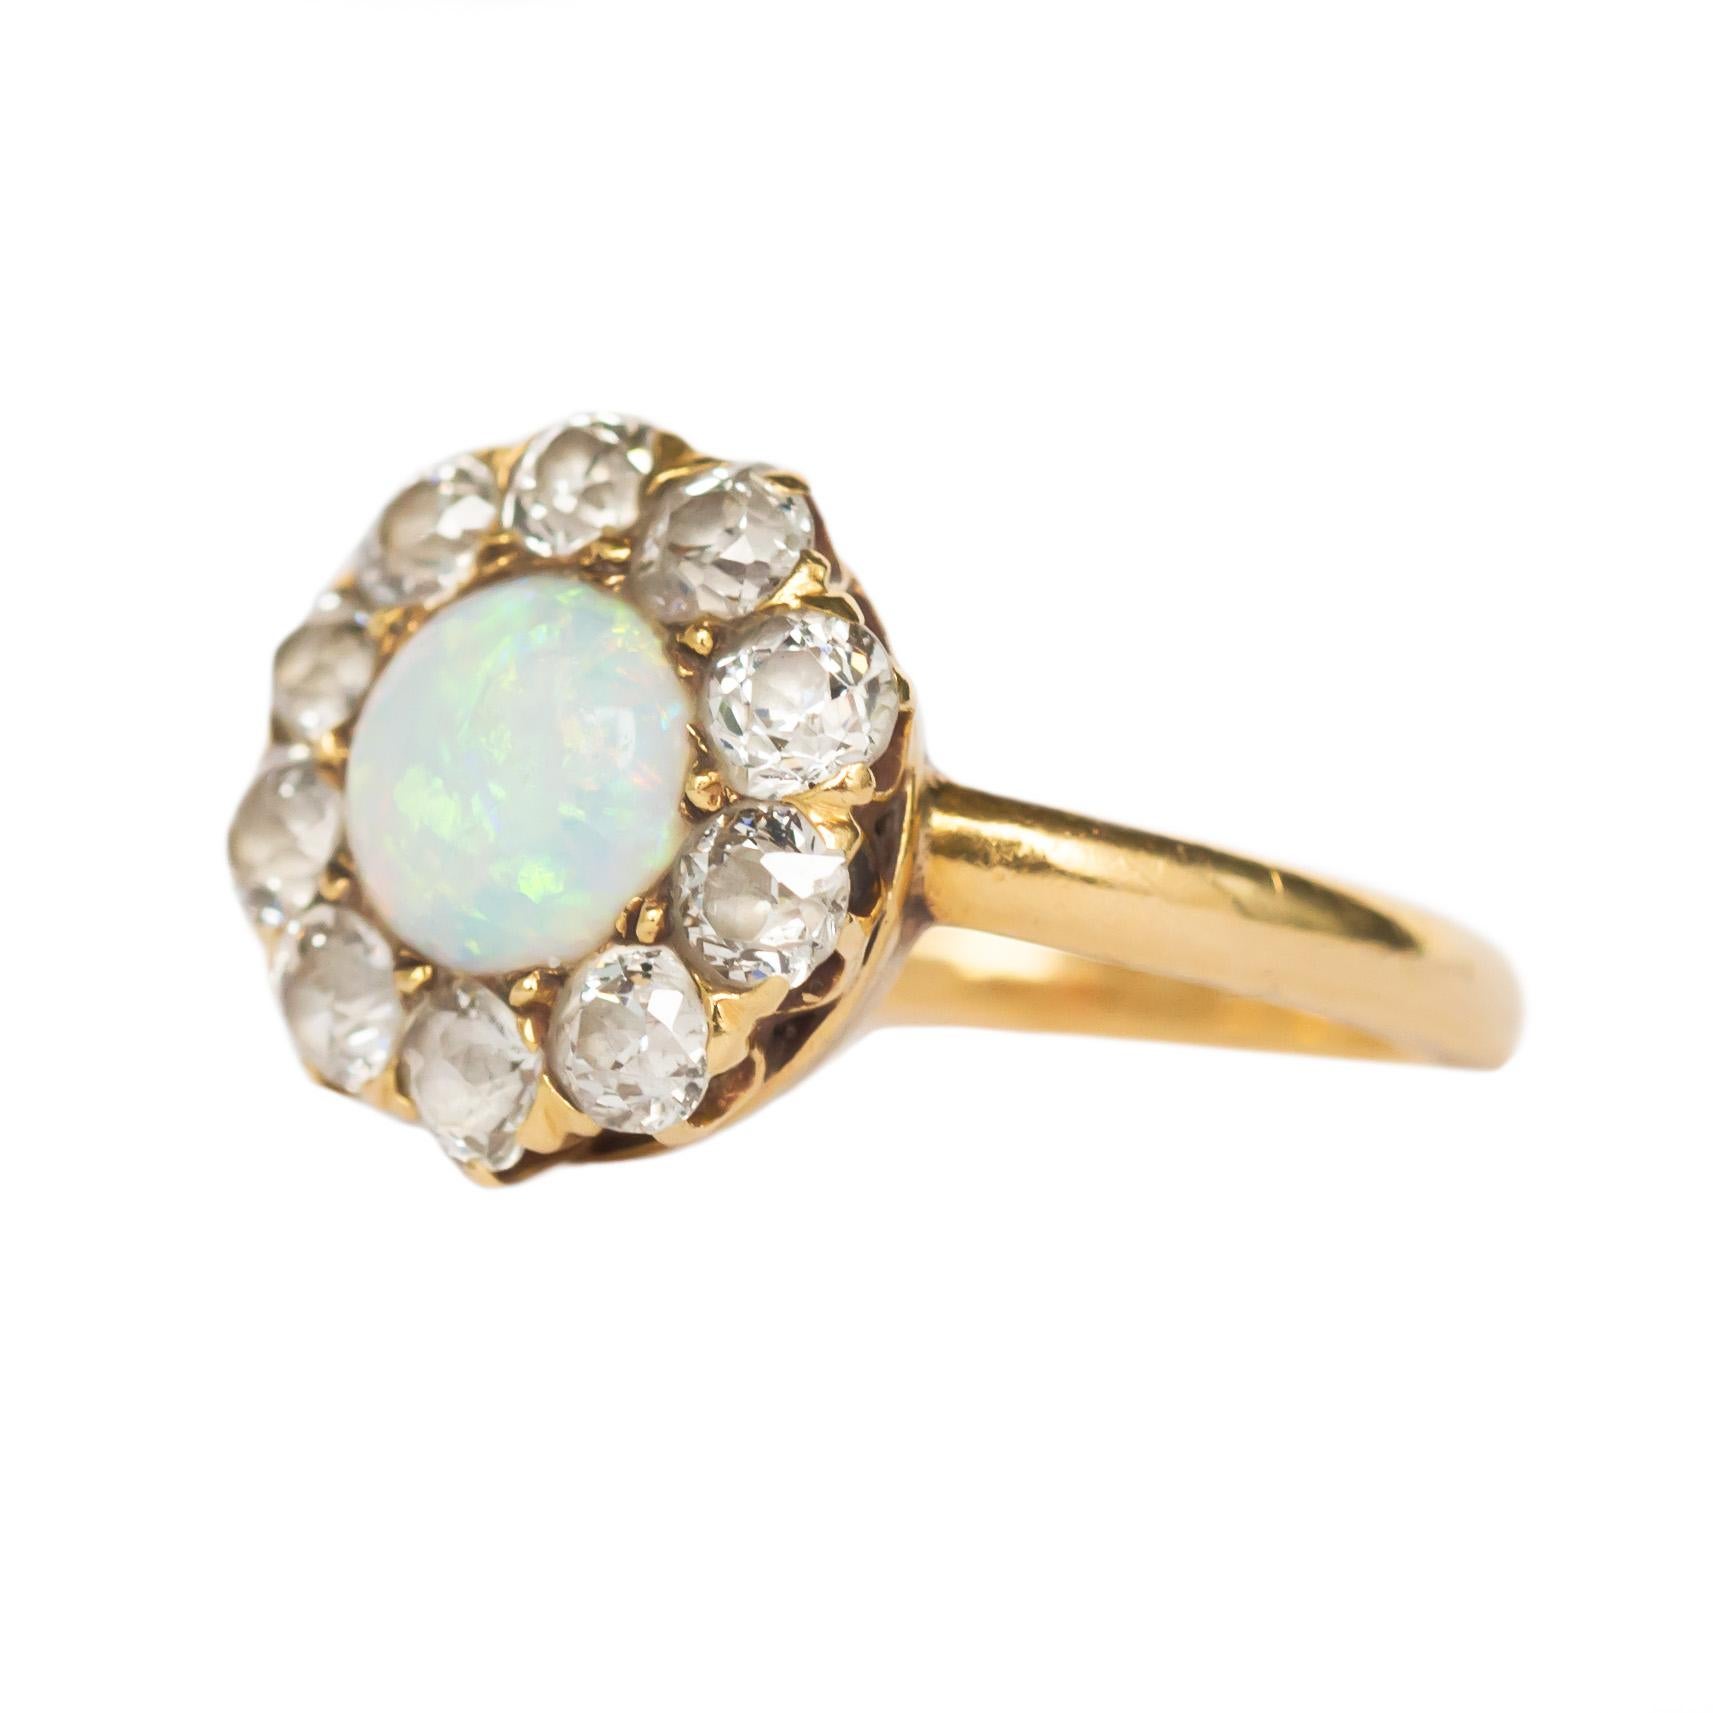 Ring Size: 4.90
Metal Type: 14 karat Yellow Gold 
Weight: 3.9 grams

Color Stone Details: 
Type: Natural Opal 
Shape: Round Cabochon
Carat Weight: 1.00 carat
Color: Rainbow Colors 

Side Stone Details: 
Shape: Antique Cushion
Total Carat Weight: .80